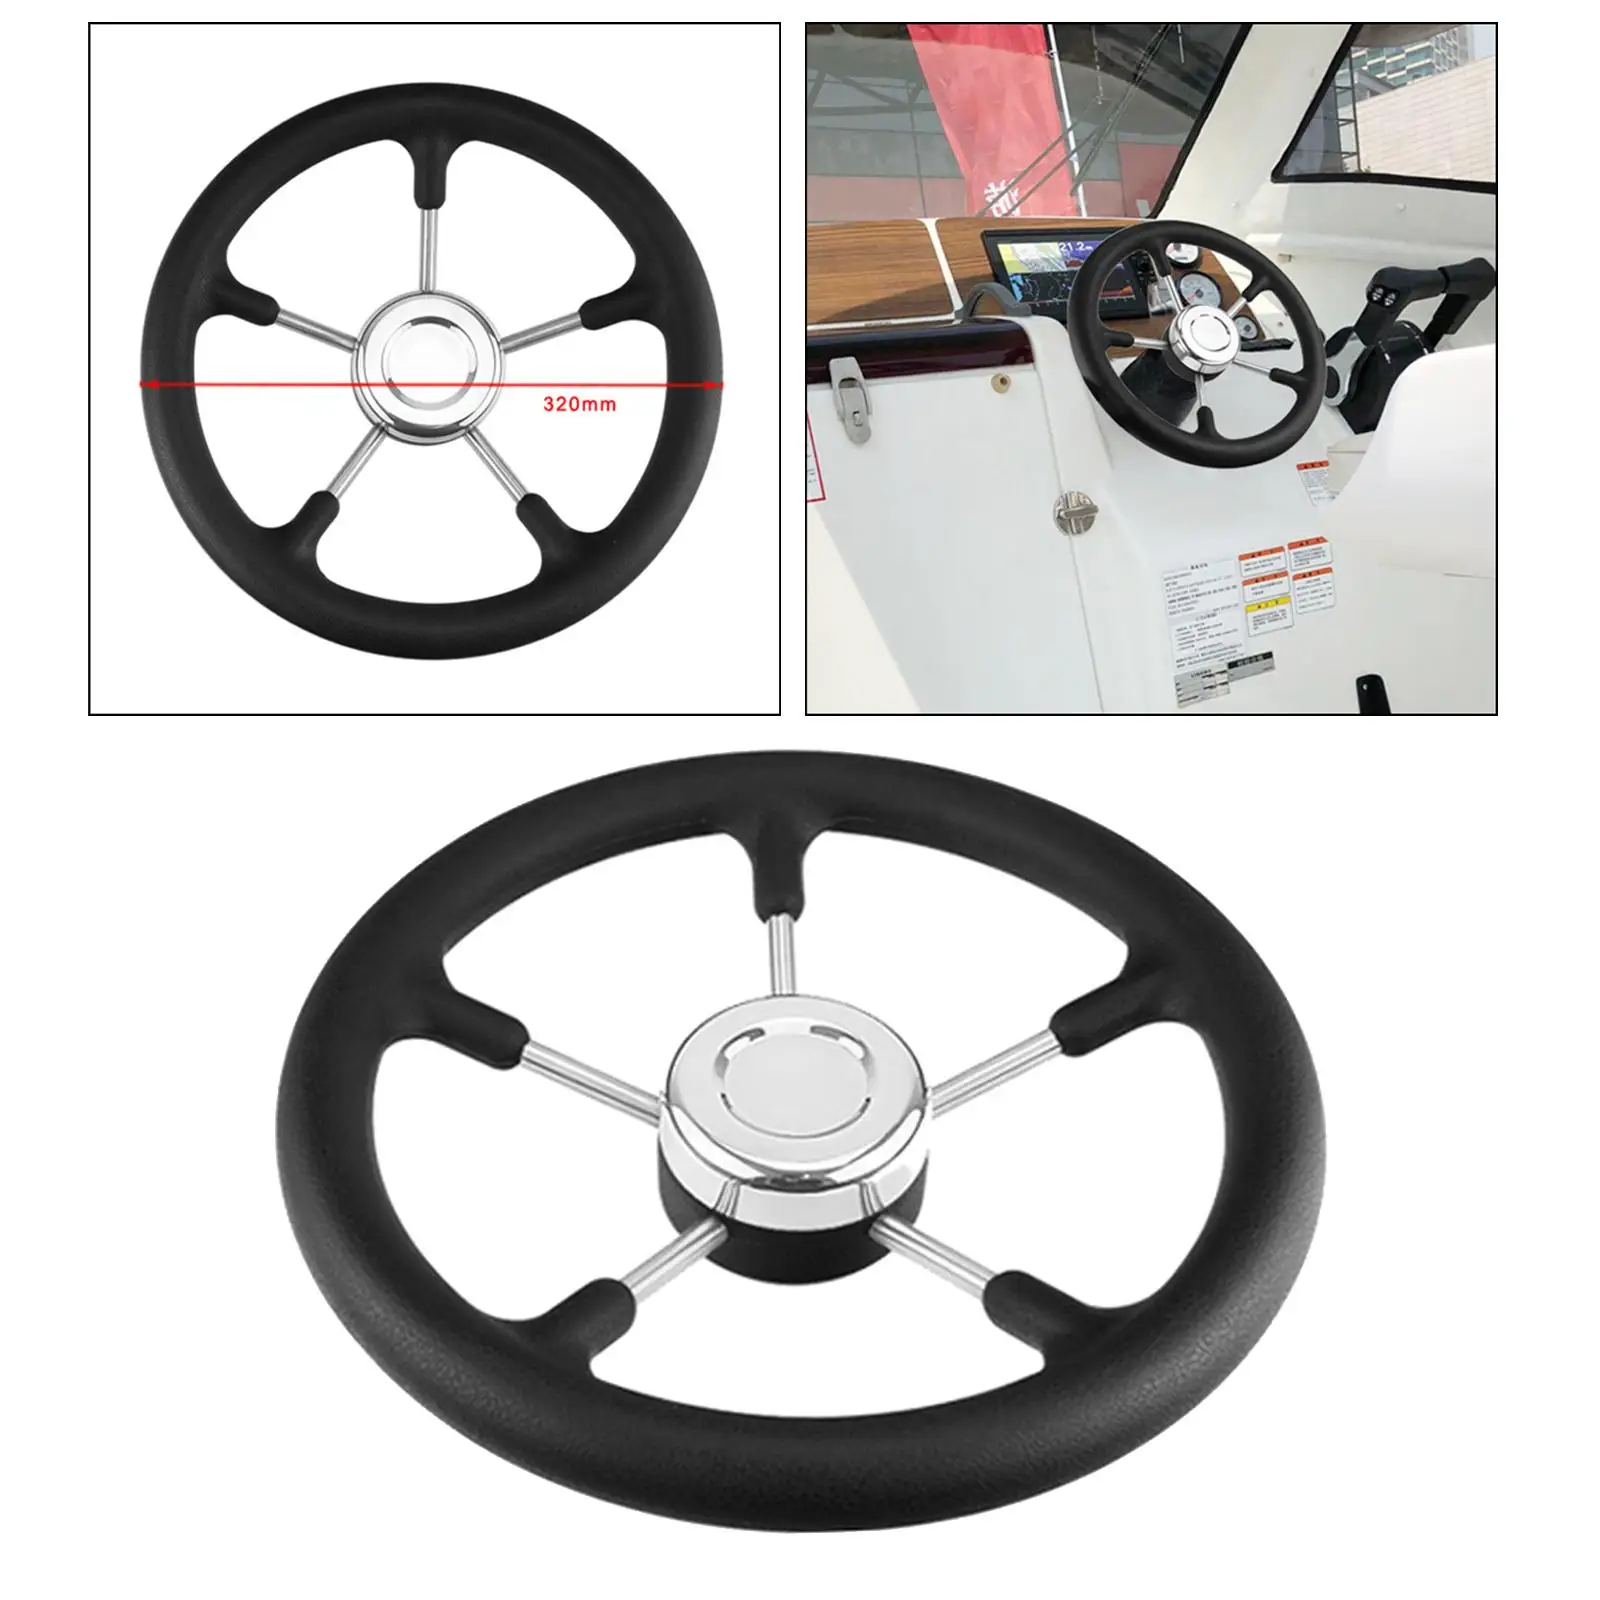 380mm Wooden Steering Wheel fit for Classic Cars, Made of Steel and Wood